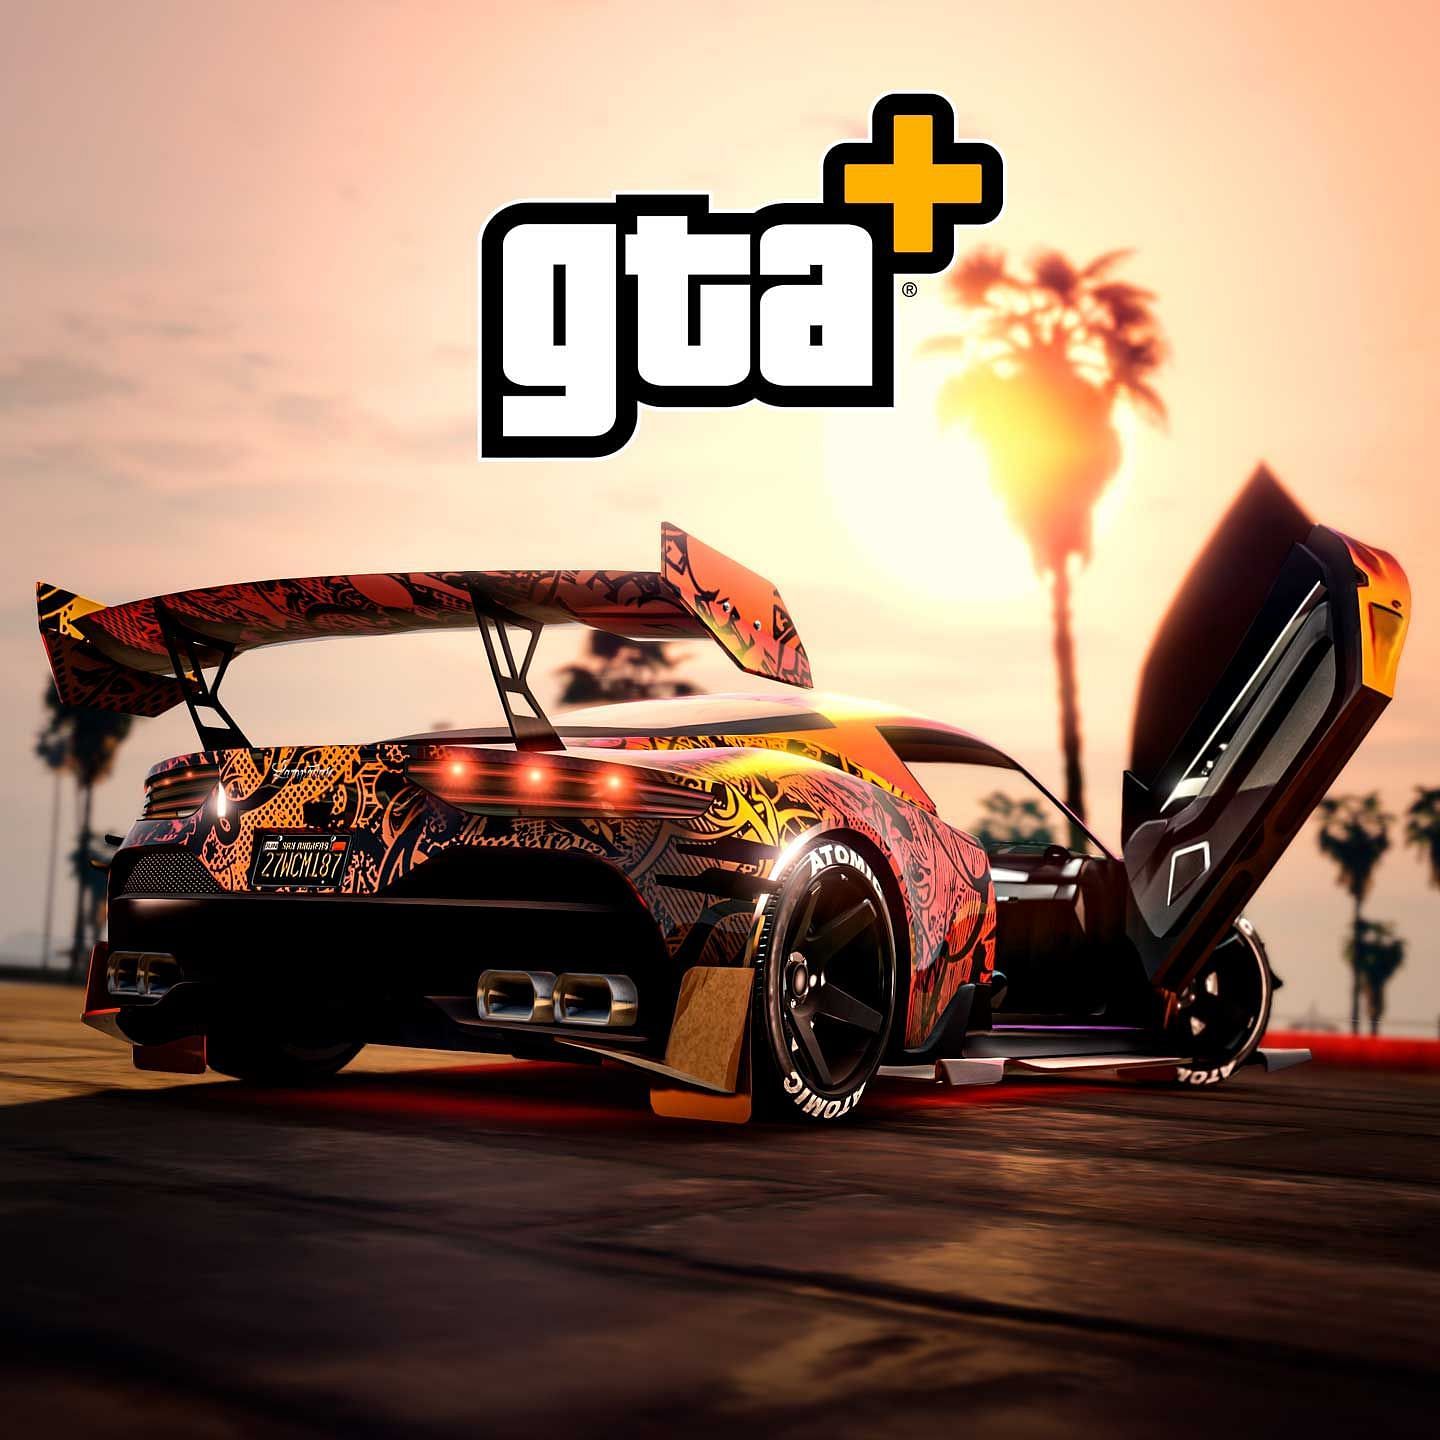 5 fastest GTA Online summer DLC cars according to lap time